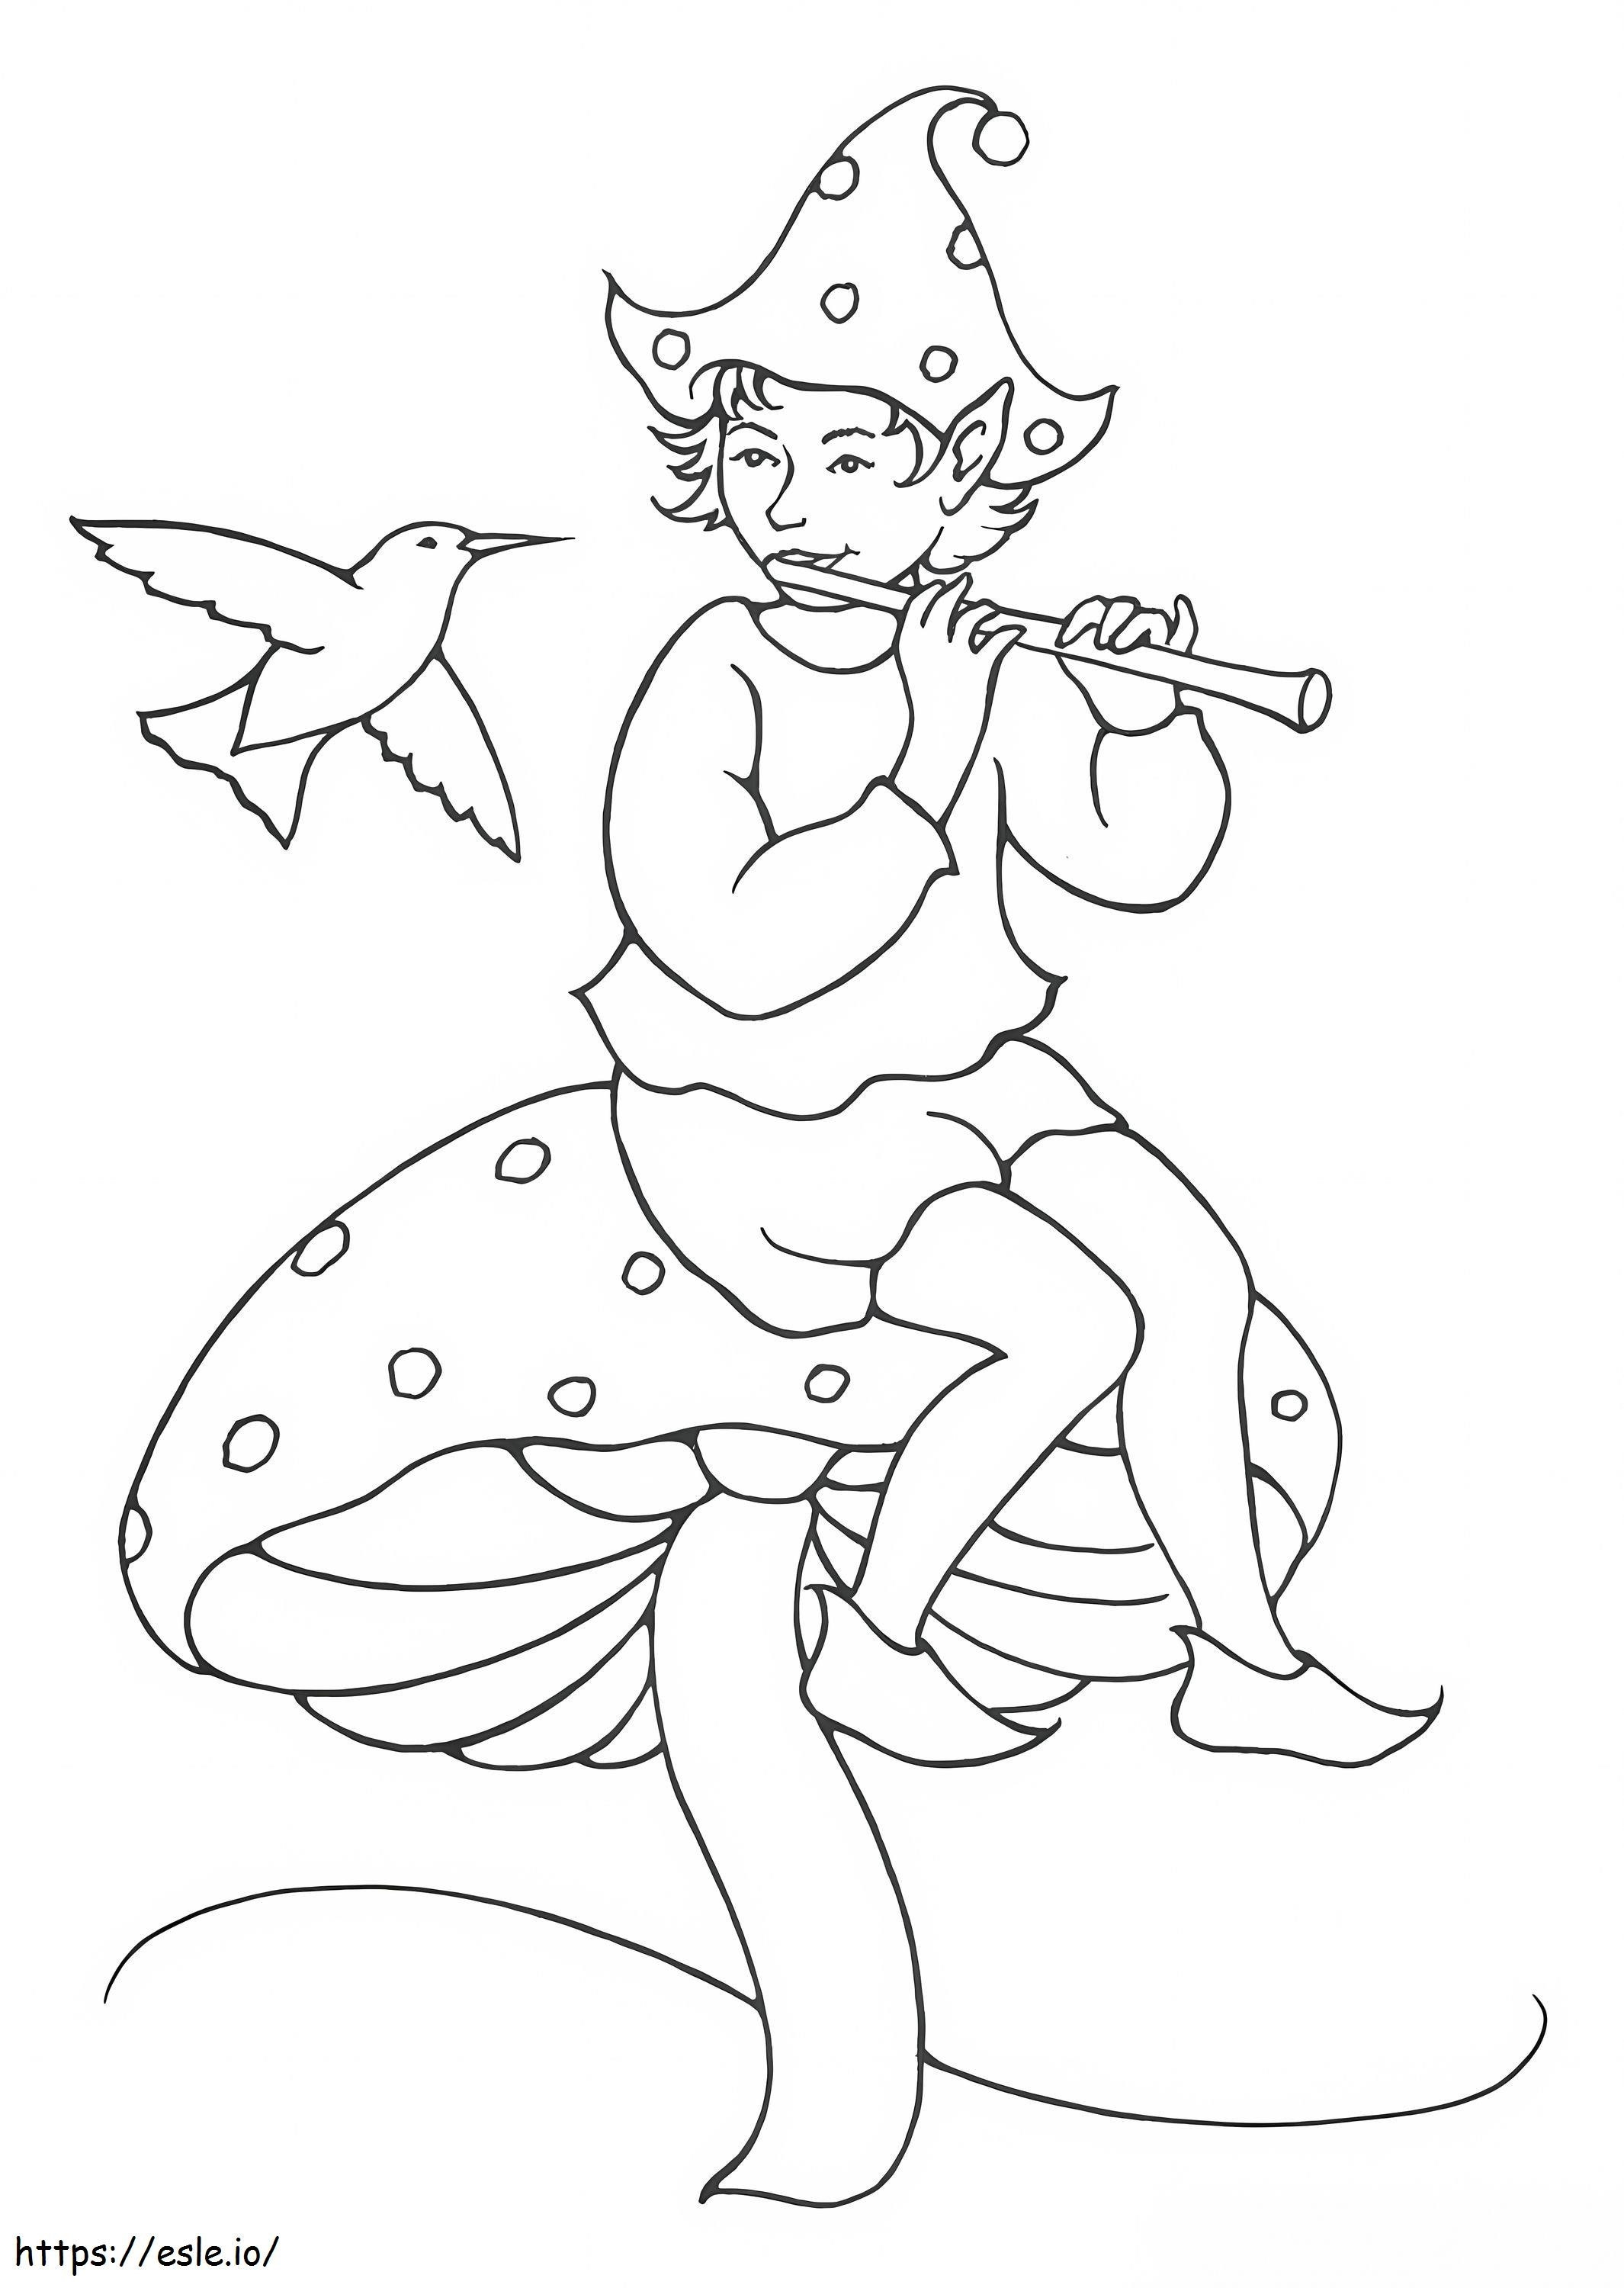 Elf Playing The Flute coloring page